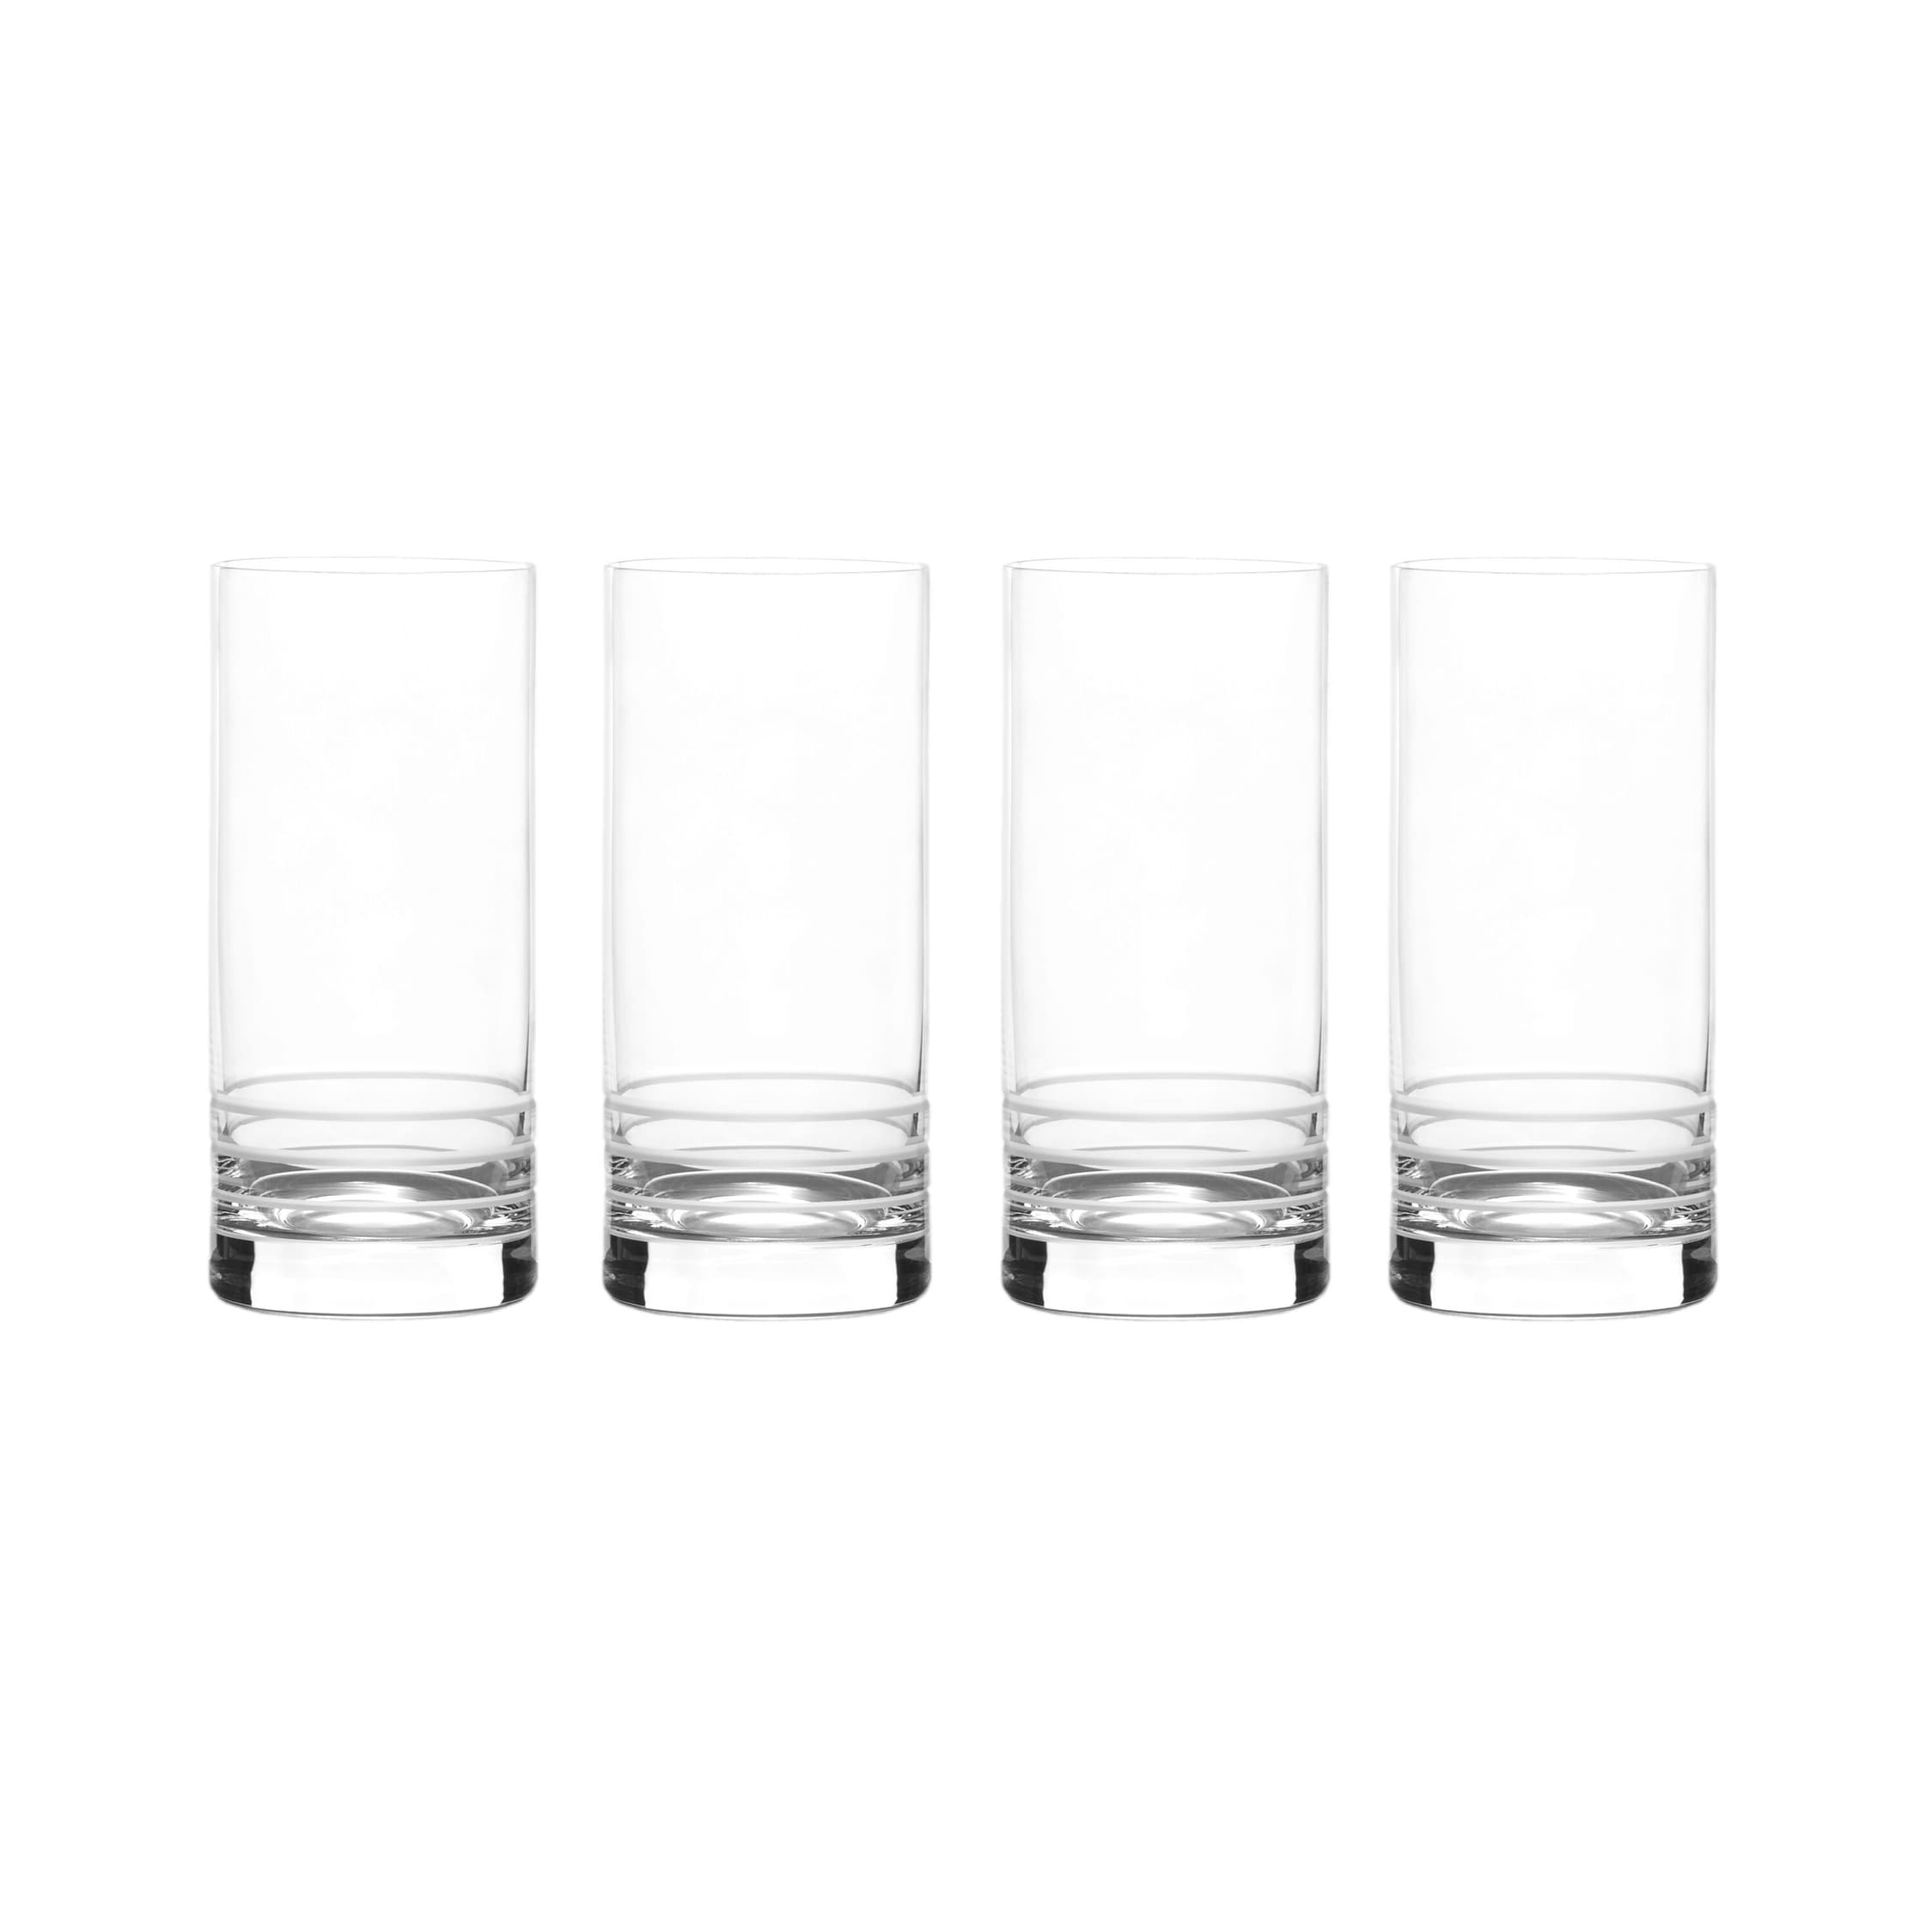 https://ak1.ostkcdn.com/images/products/is/images/direct/a2d2a0c8c478414be712afd1a69653b8e4eccf34/Mikasa-Cal-17OZ-Highball-Glass-%28Set-of-4%29.jpg